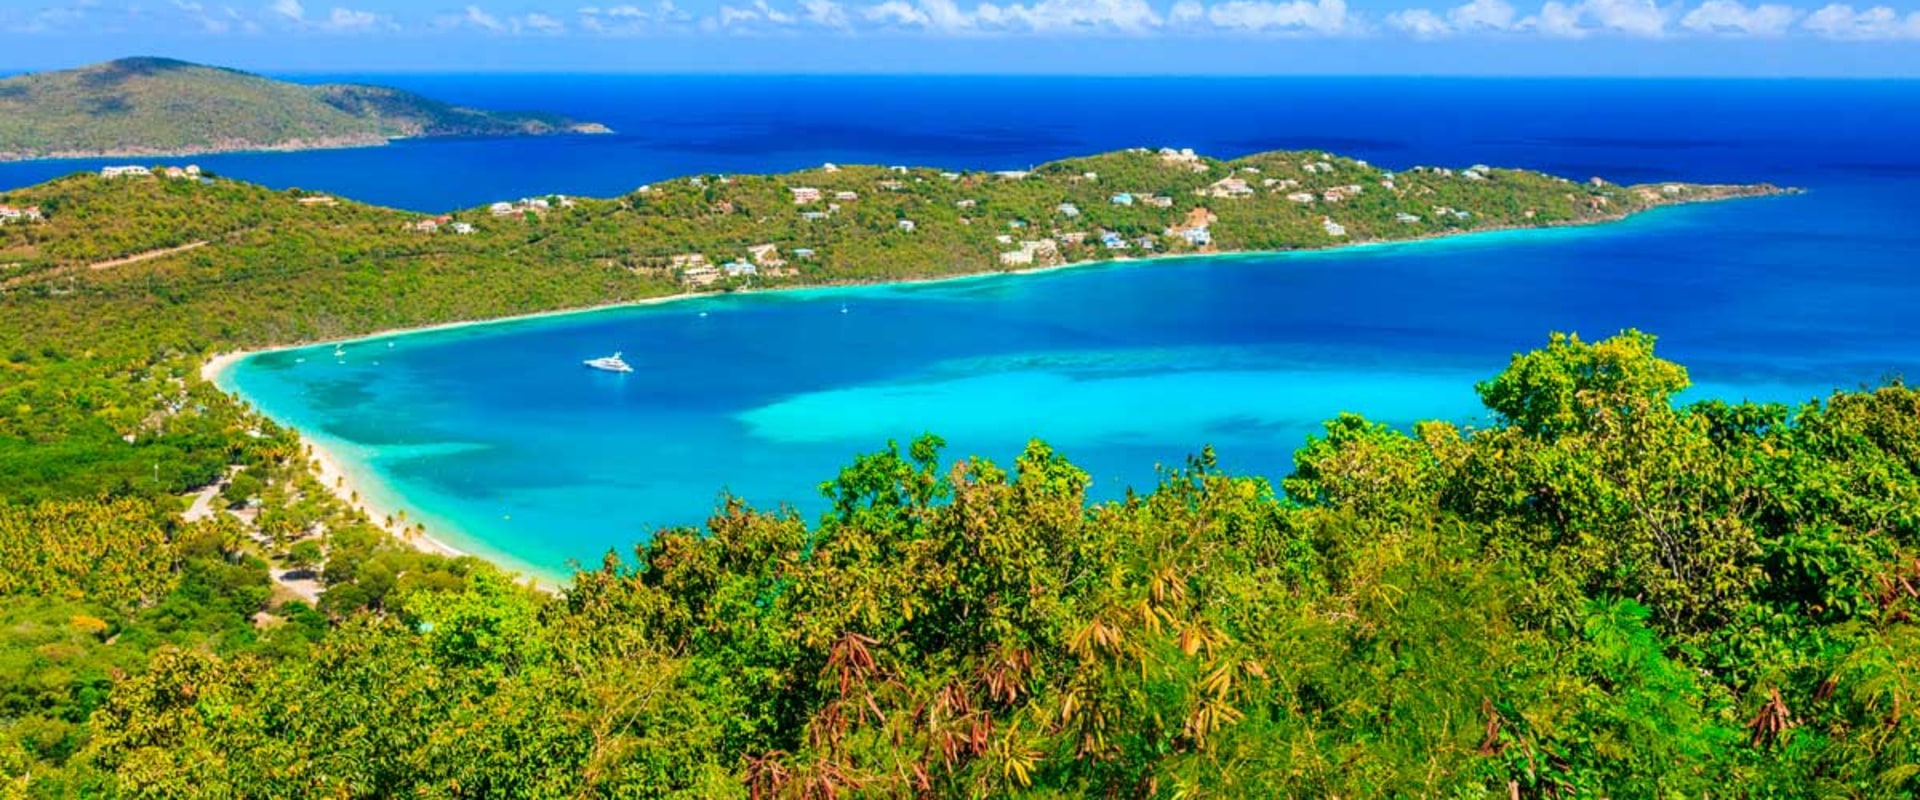 Exploring the United States Virgin Islands: How to Get from One Island to Another